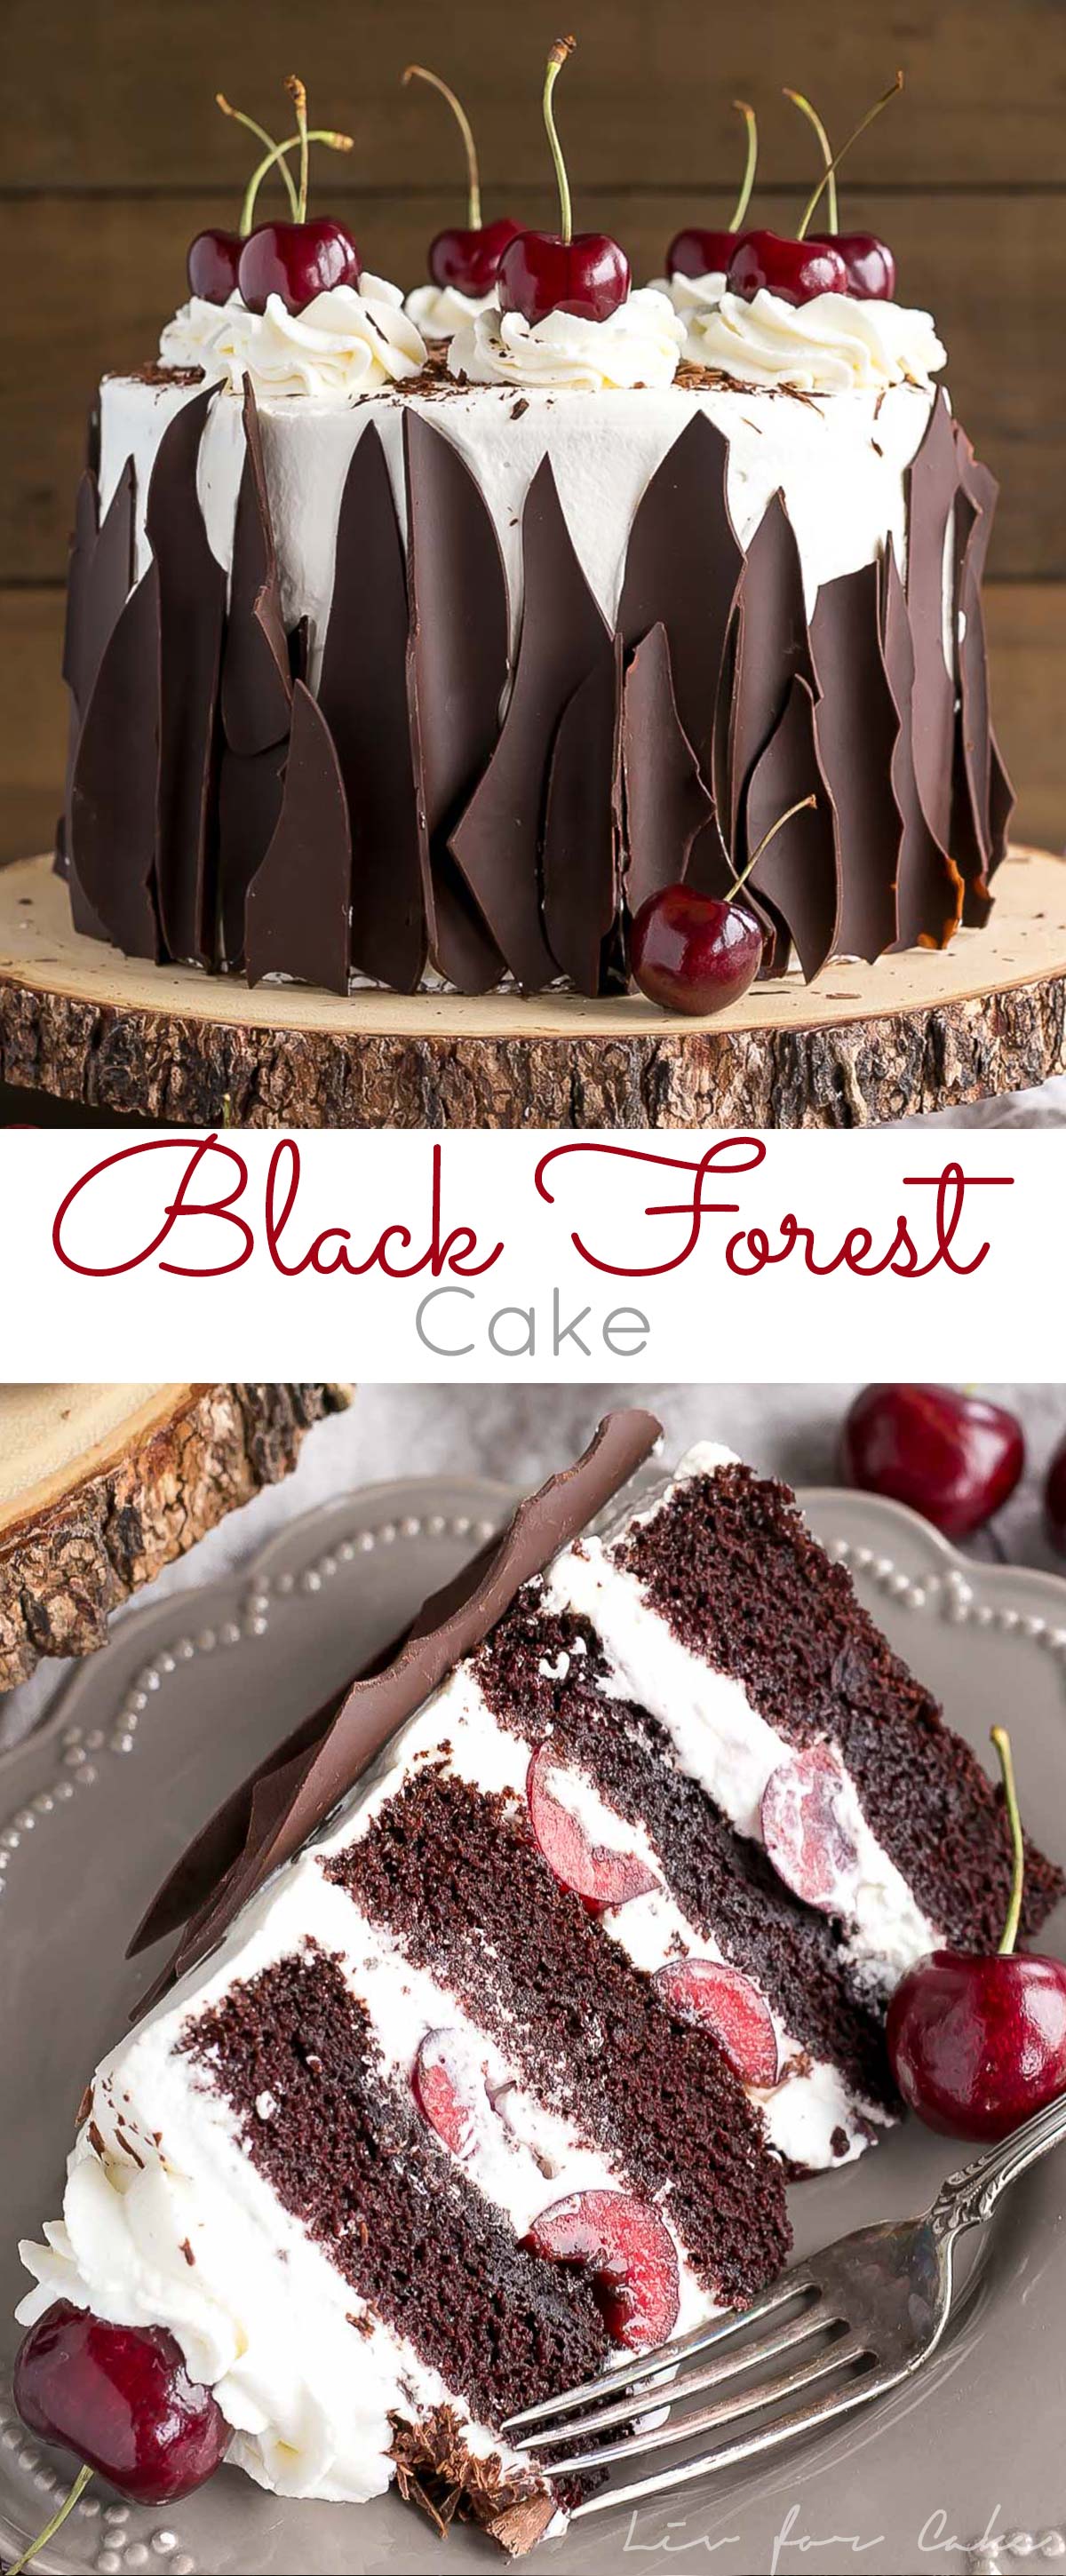 Black forest cake photo collage